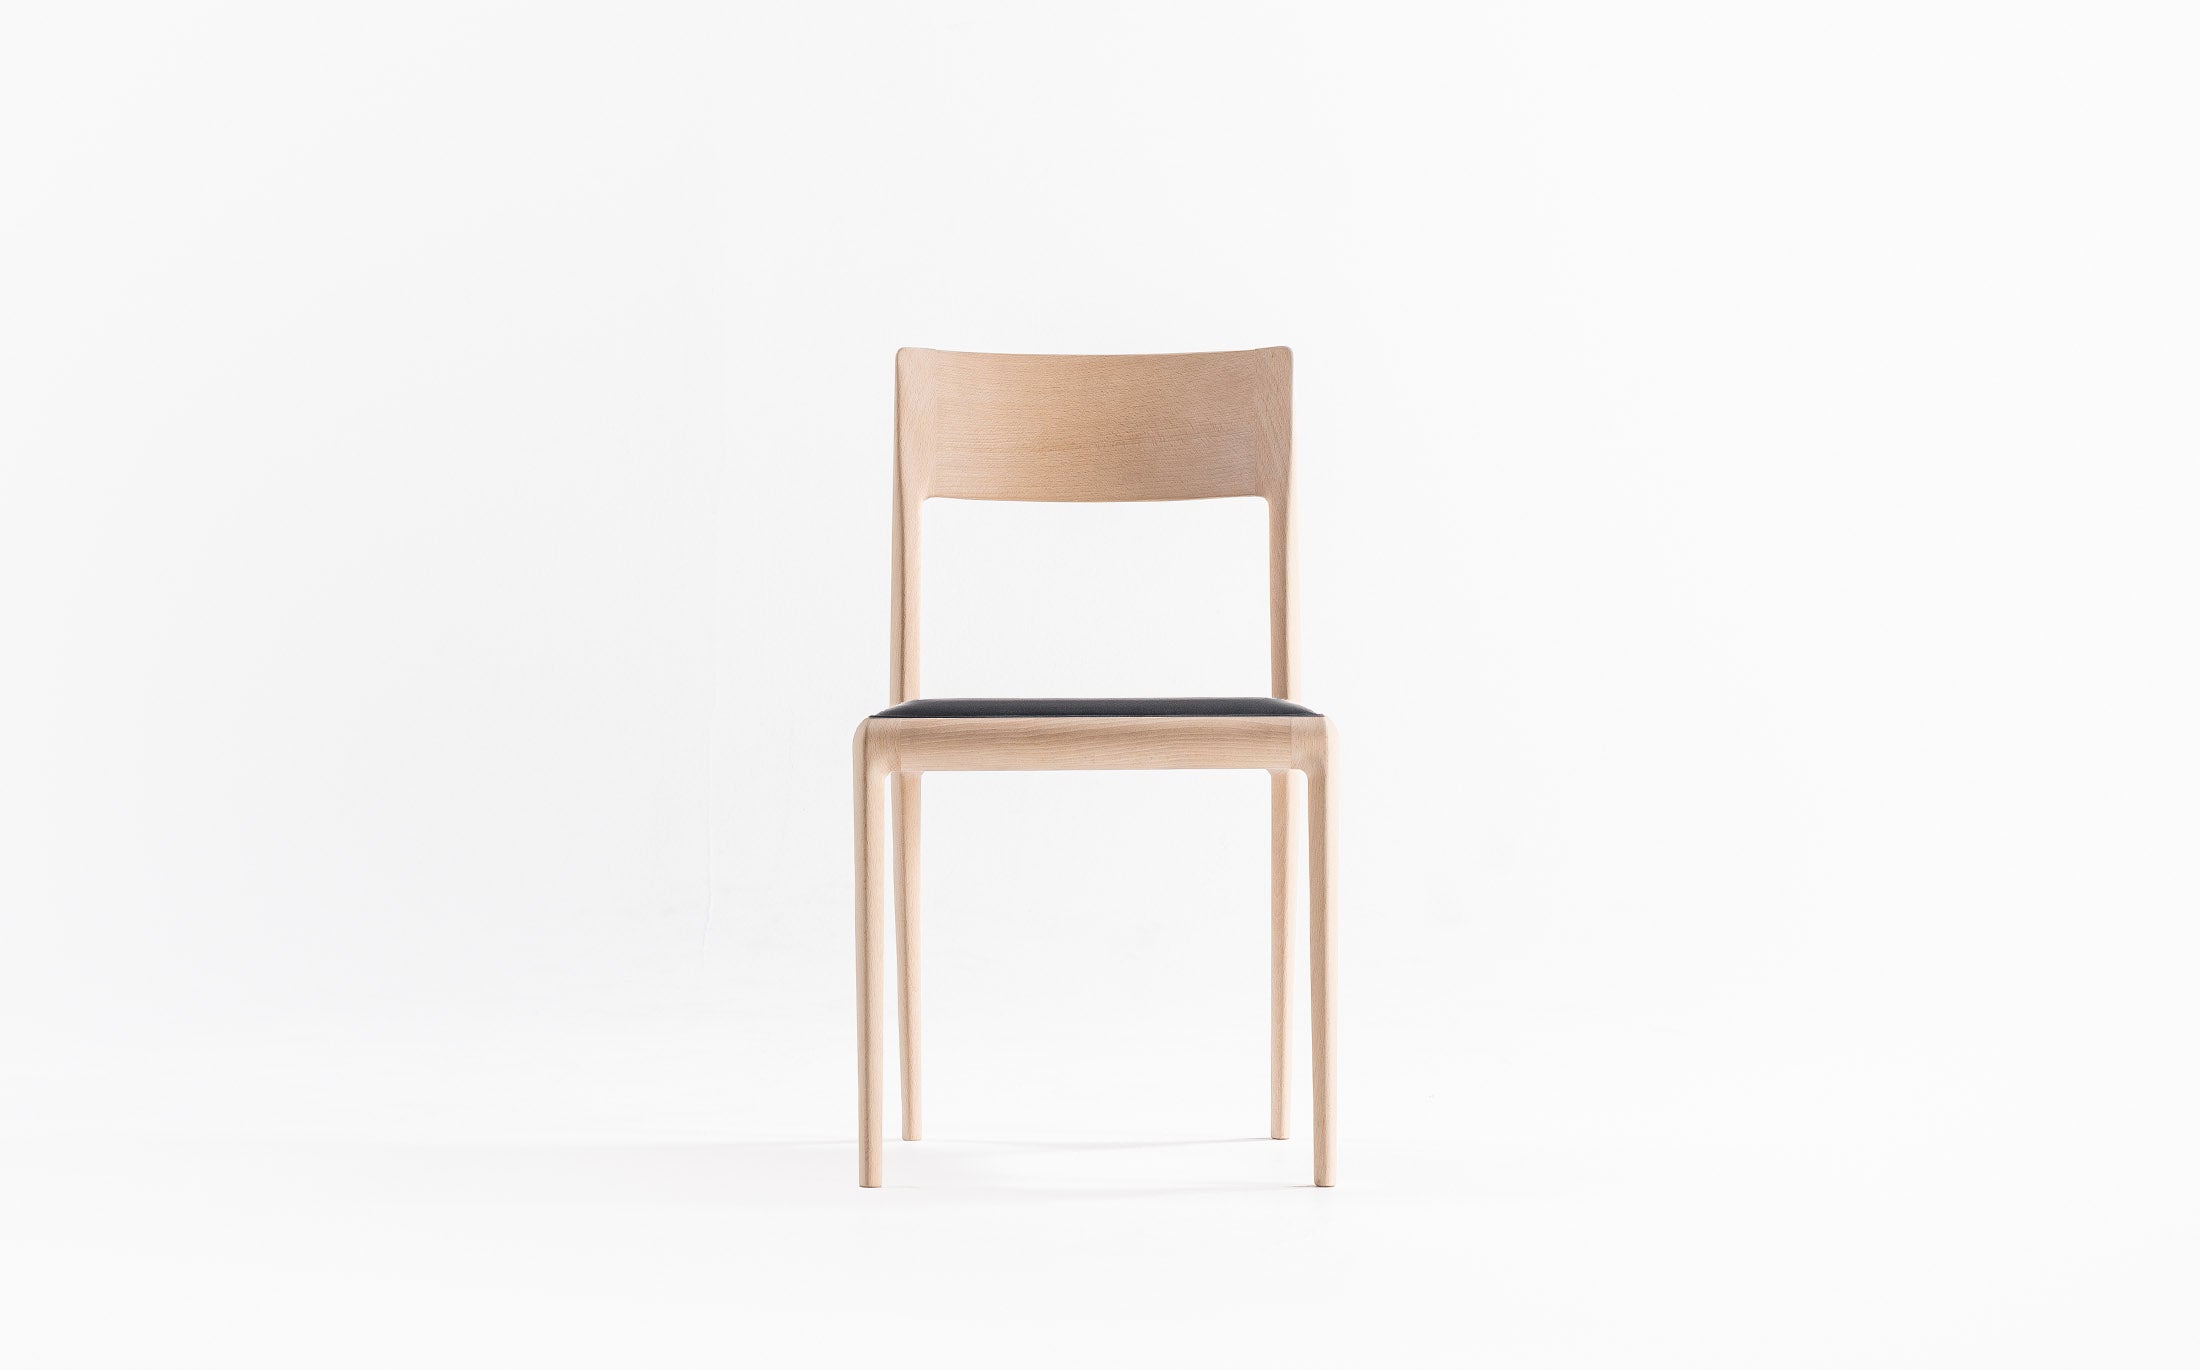 The curving chair #Seat materials_smooth leather 40107